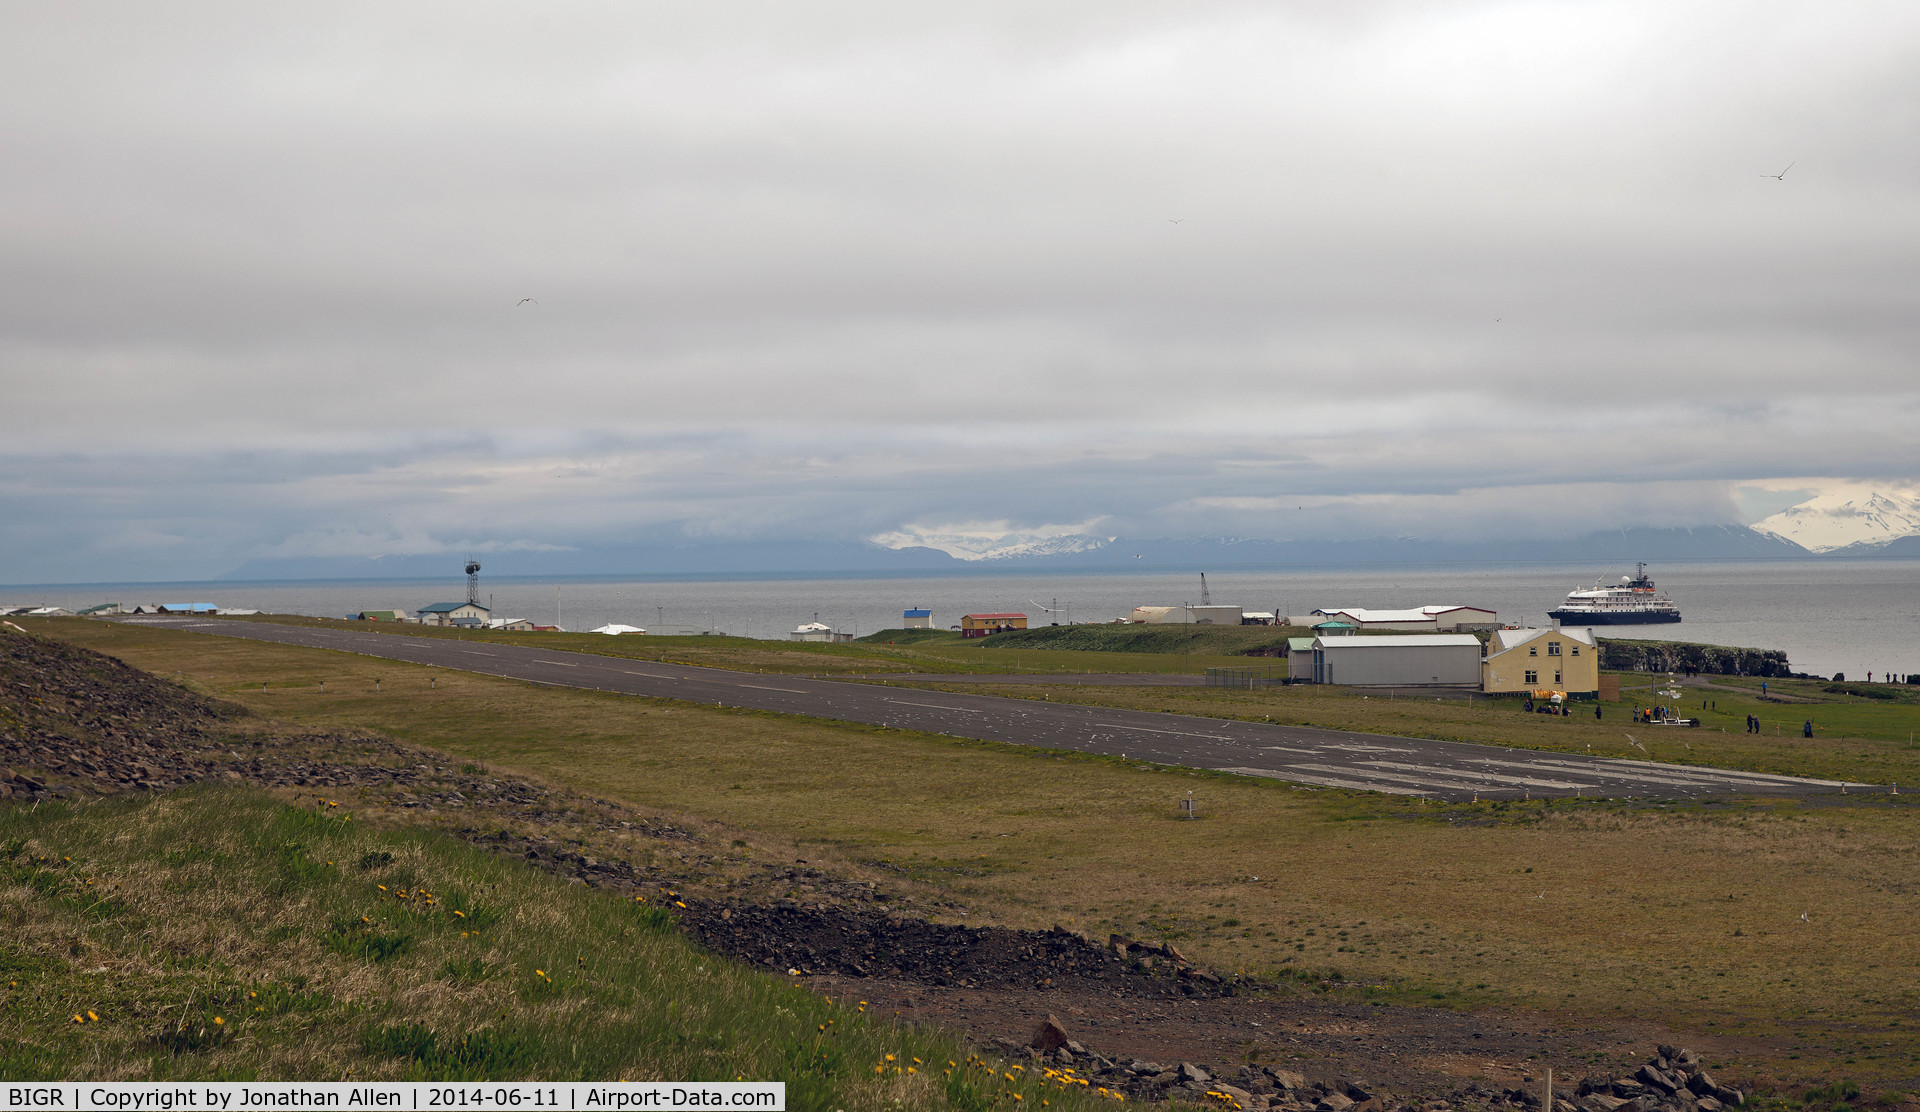 Grimsey Airport, Grimsey Iceland (BIGR) - Grimsay Airport runway. The island is a major breeding ground for Arctic Tern and care is required to use this airport.